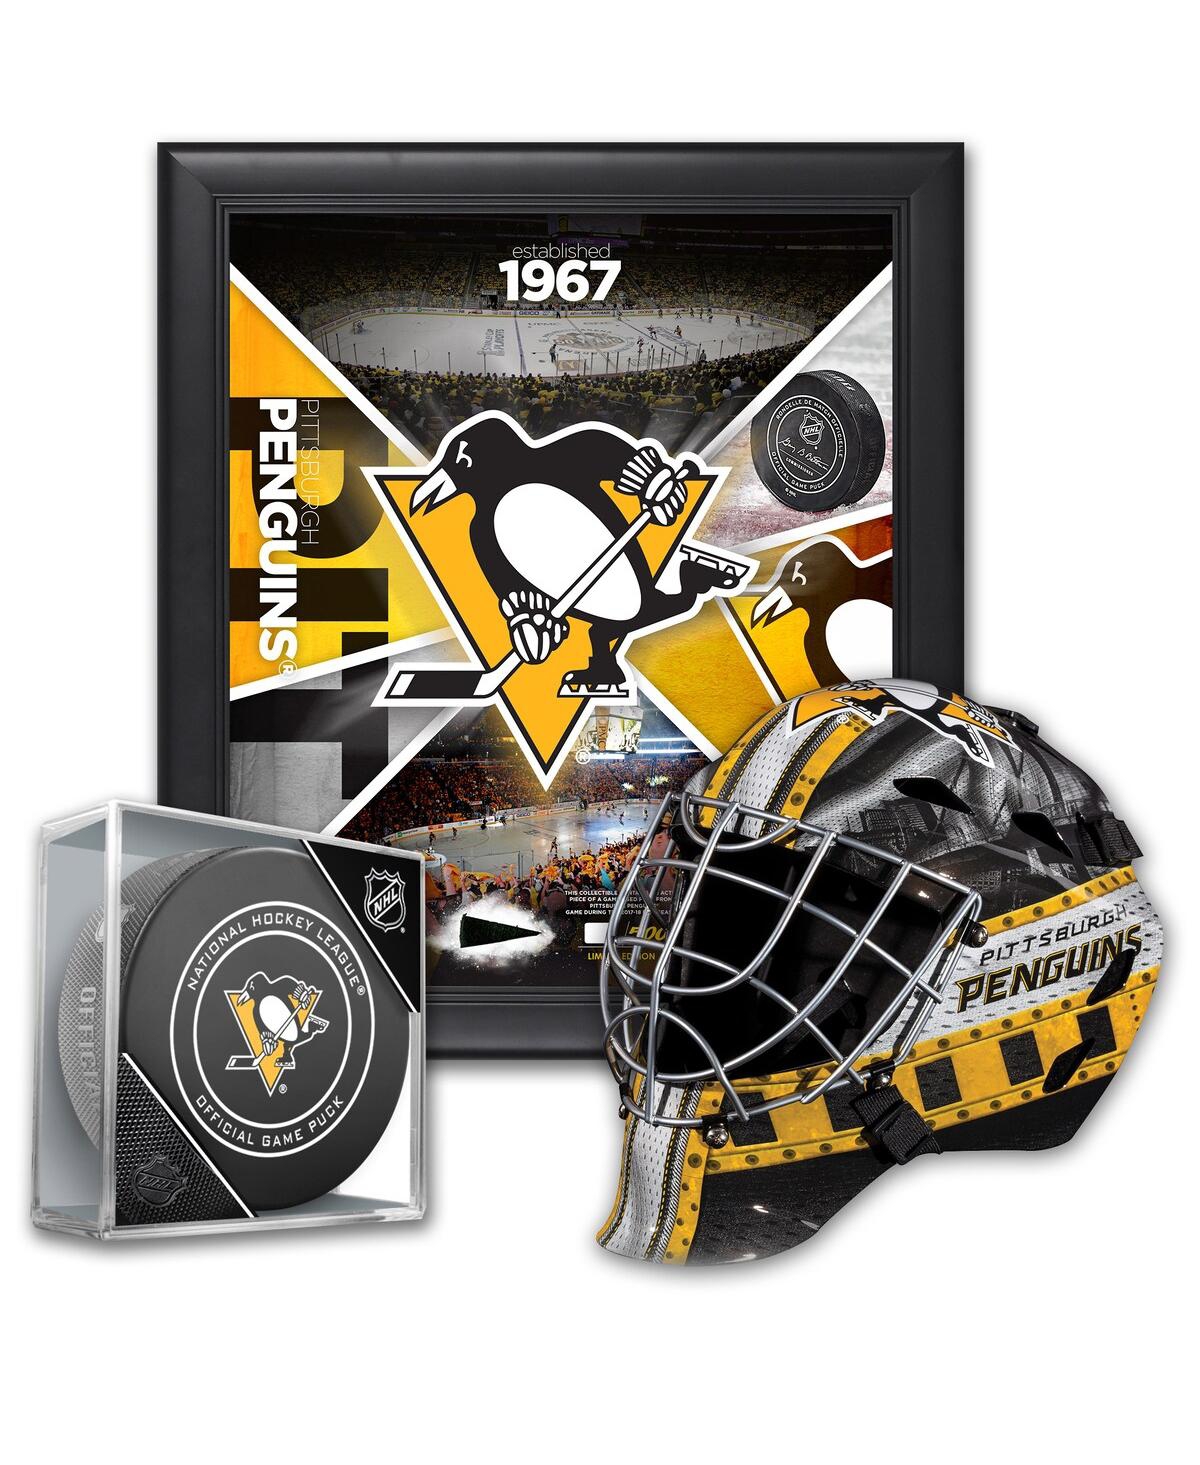 Pittsburgh Penguins Ultimate Fan Collectibles Bundle - Includes Team Impact 15" x 17" Frame Mini Goalie Mask and Official Game Puck - Multi